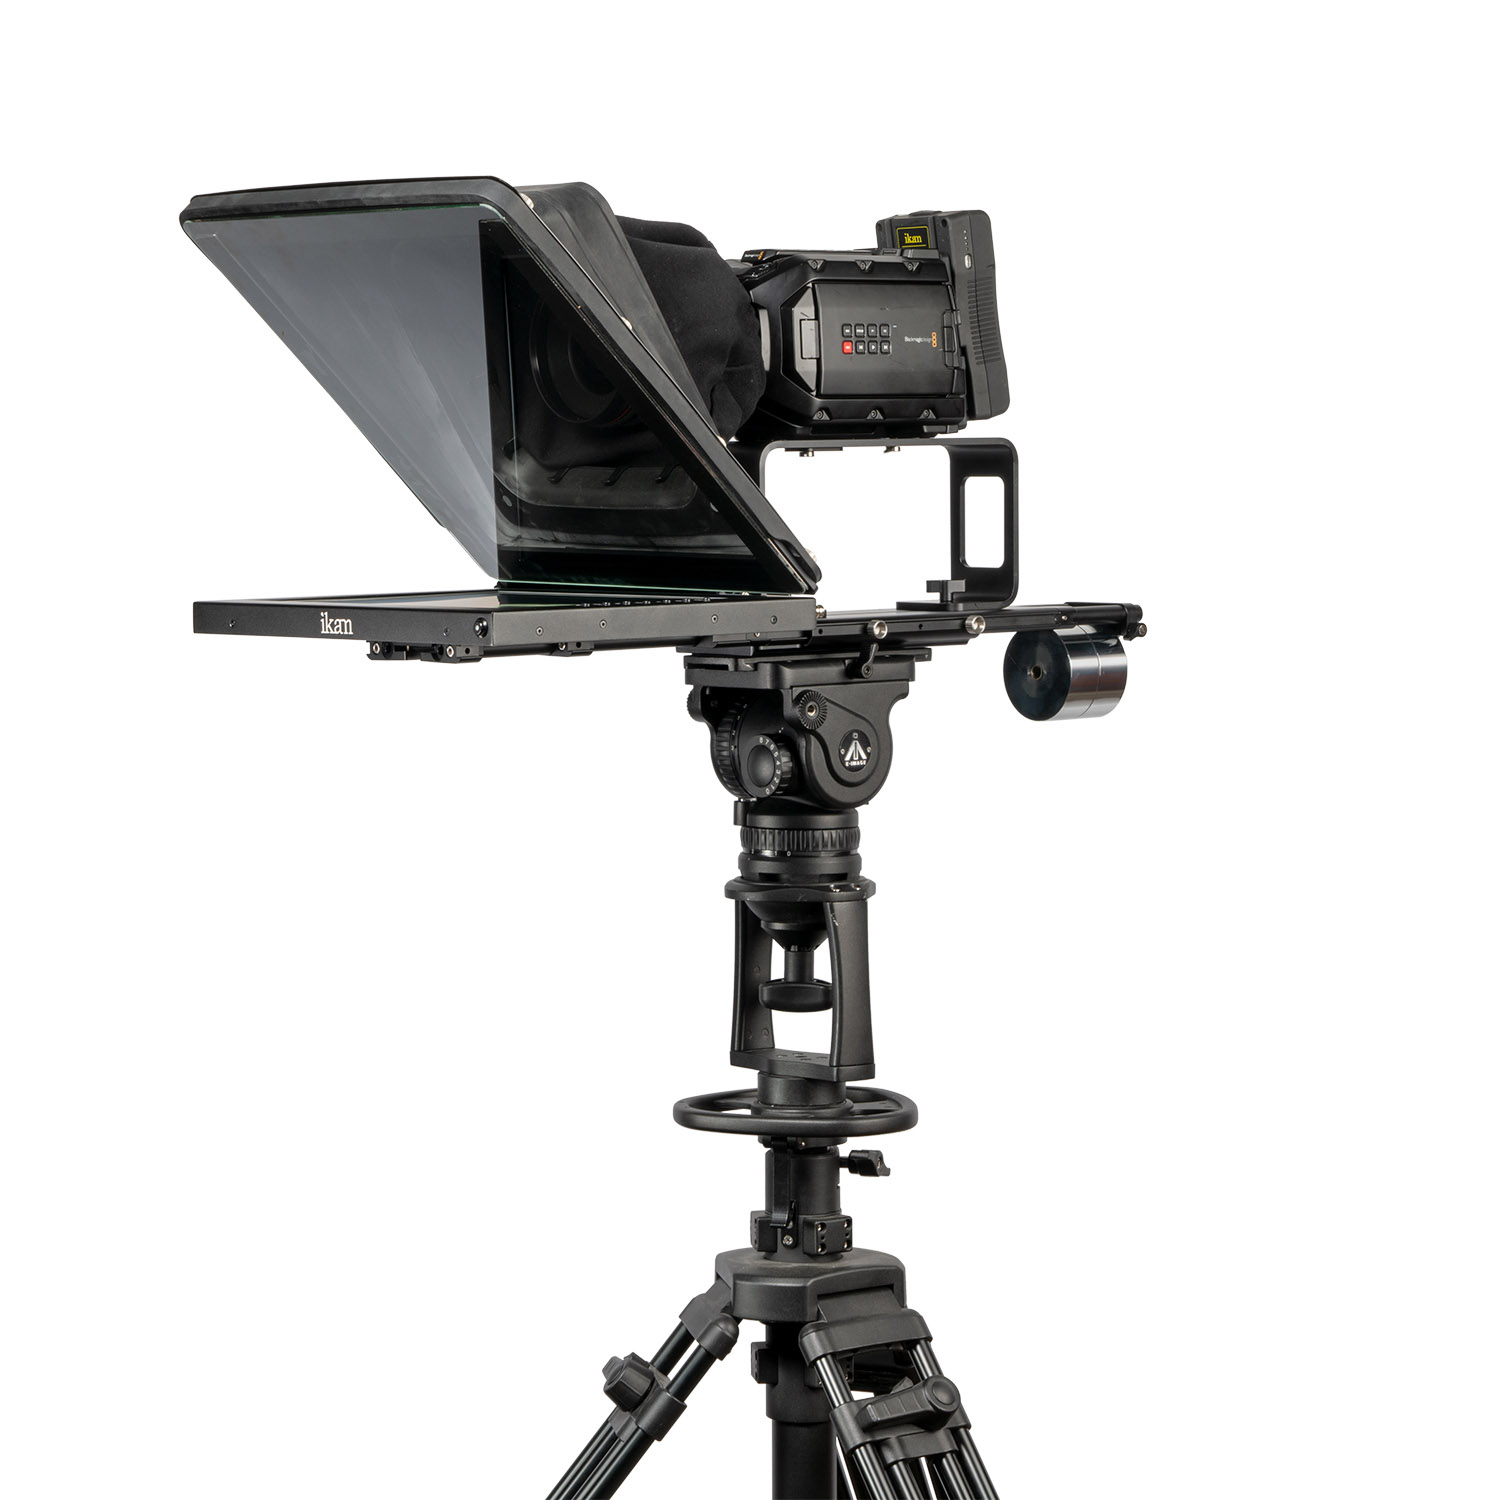 Ikan Professional High-Bright Teleprompter with Talent Monitor Kit (15 ")